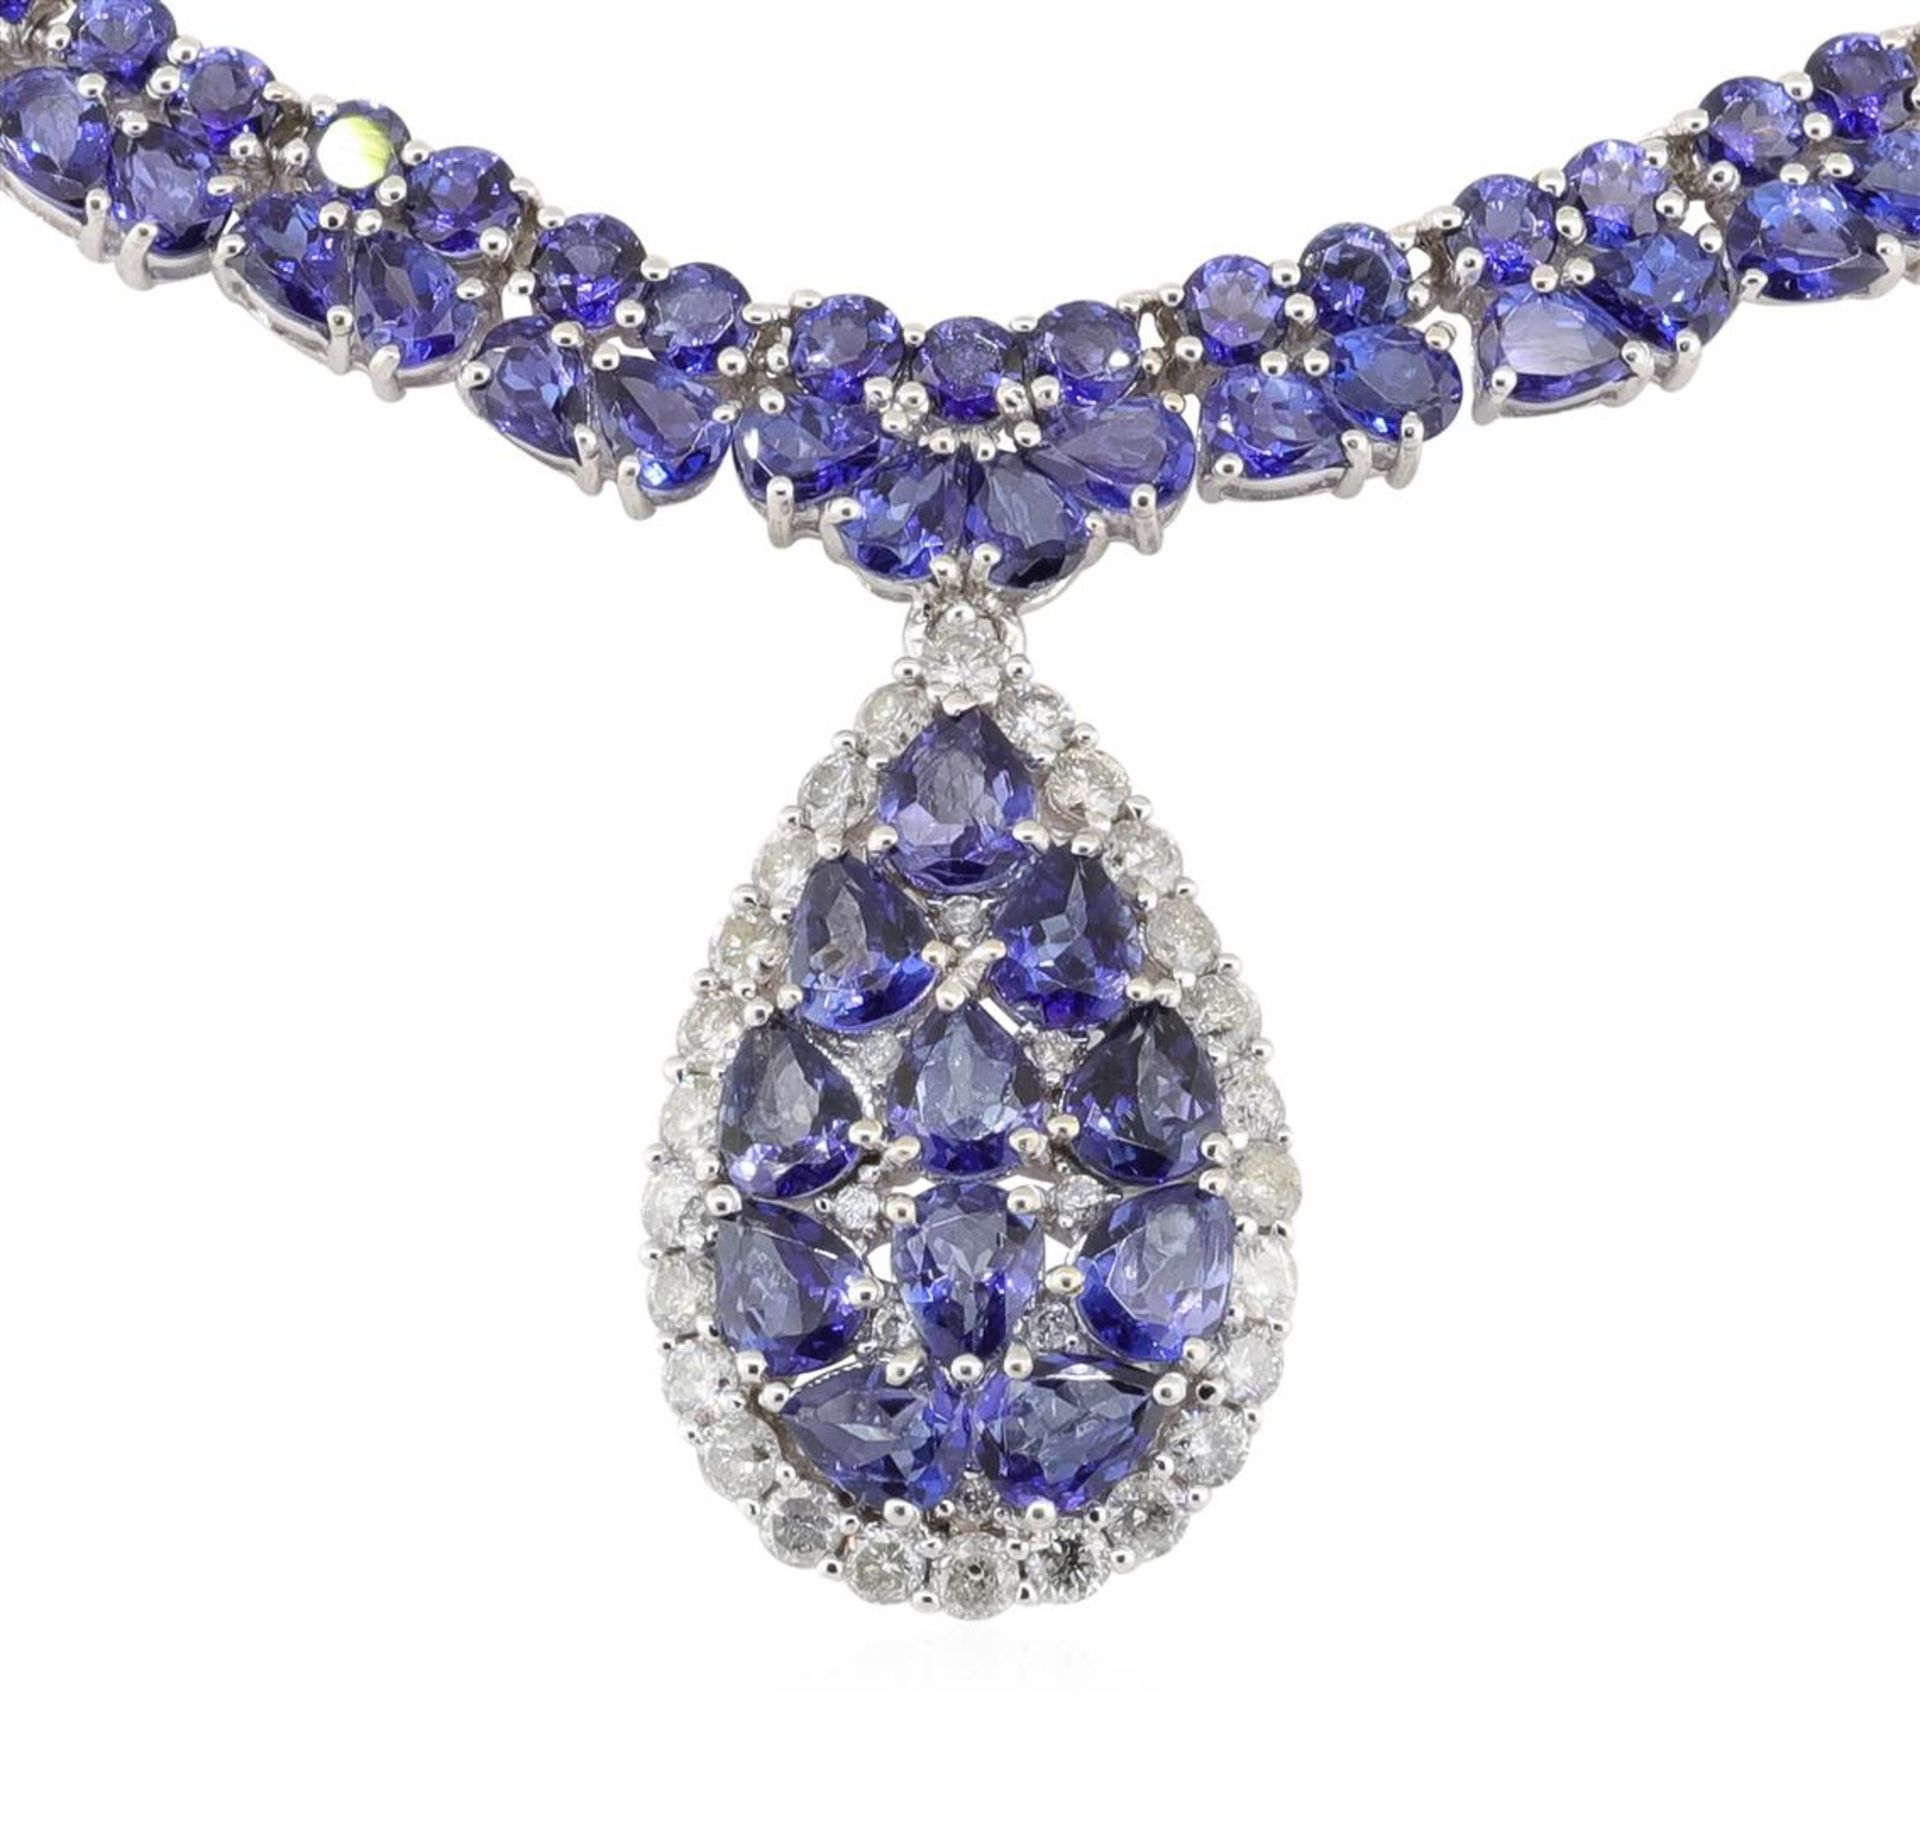 34.55ctw Tanzanite and Diamond Necklace - 14KT White Gold - Image 2 of 2